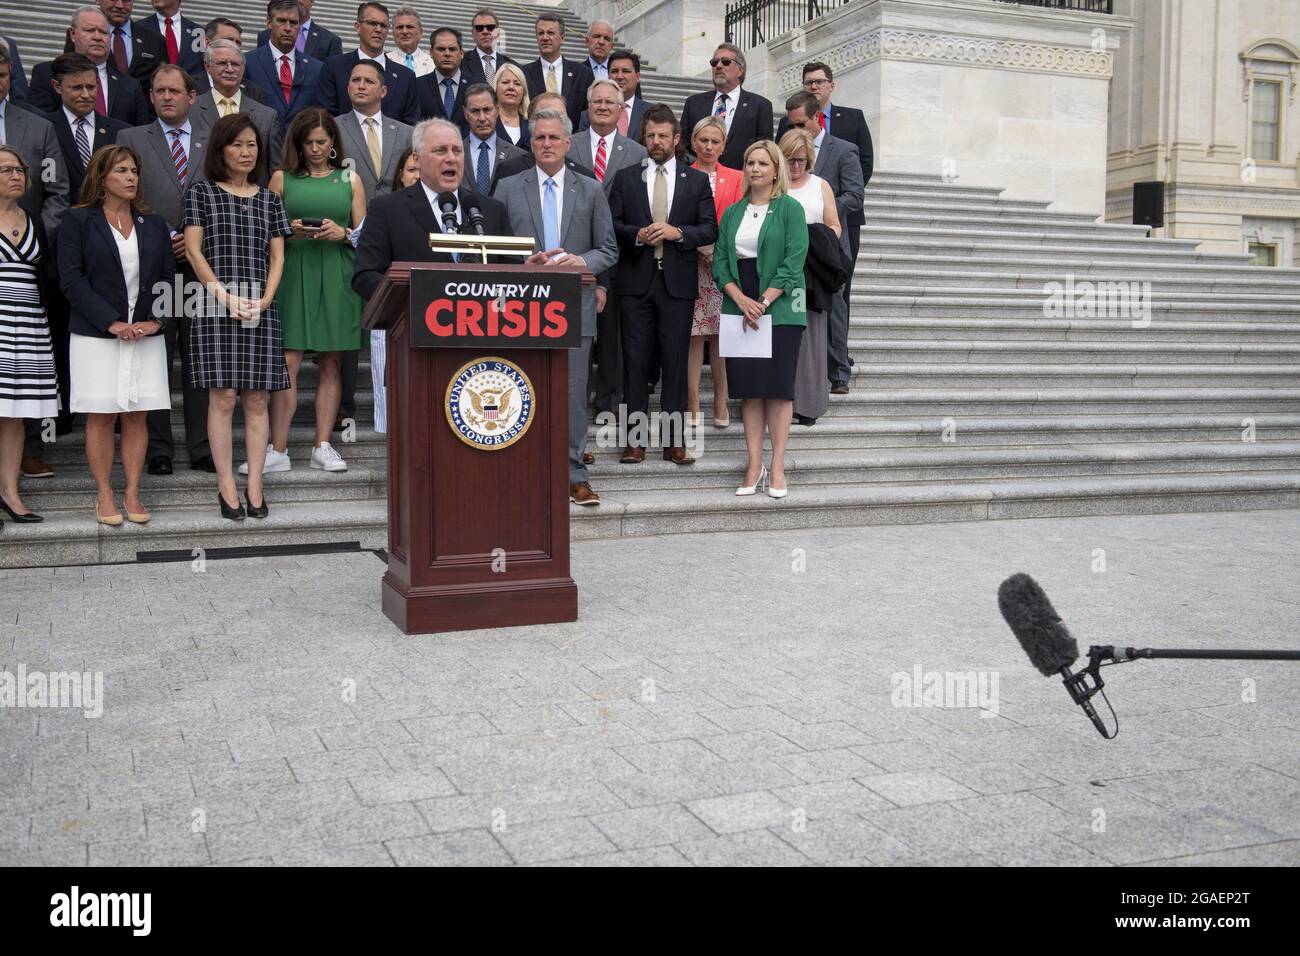 United States House Minority Whip Steve Scalise (Republican of Louisiana) offers remarks on President Joe Biden and House Speaker Nancy Pelosi's leadership during a press conference outside of the US Capitol in Washington, DC, Thursday, July 29, 2021. Photo by Rod Lamkey/CNP/ABACAPRESS.COM Stock Photo